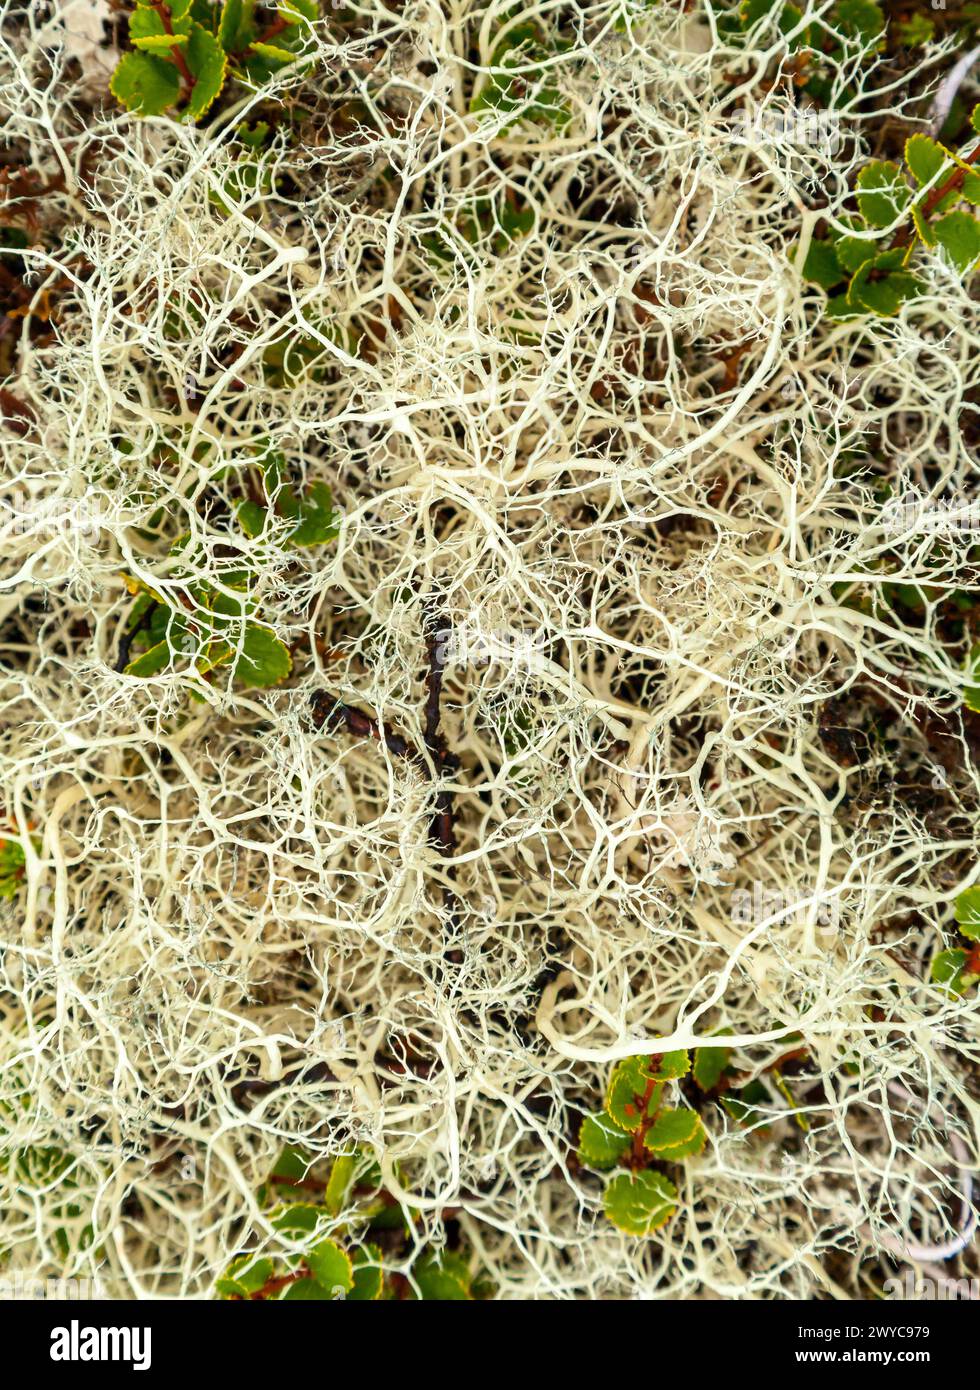 Reindeer lichen in tundra, close-up Stock Photo